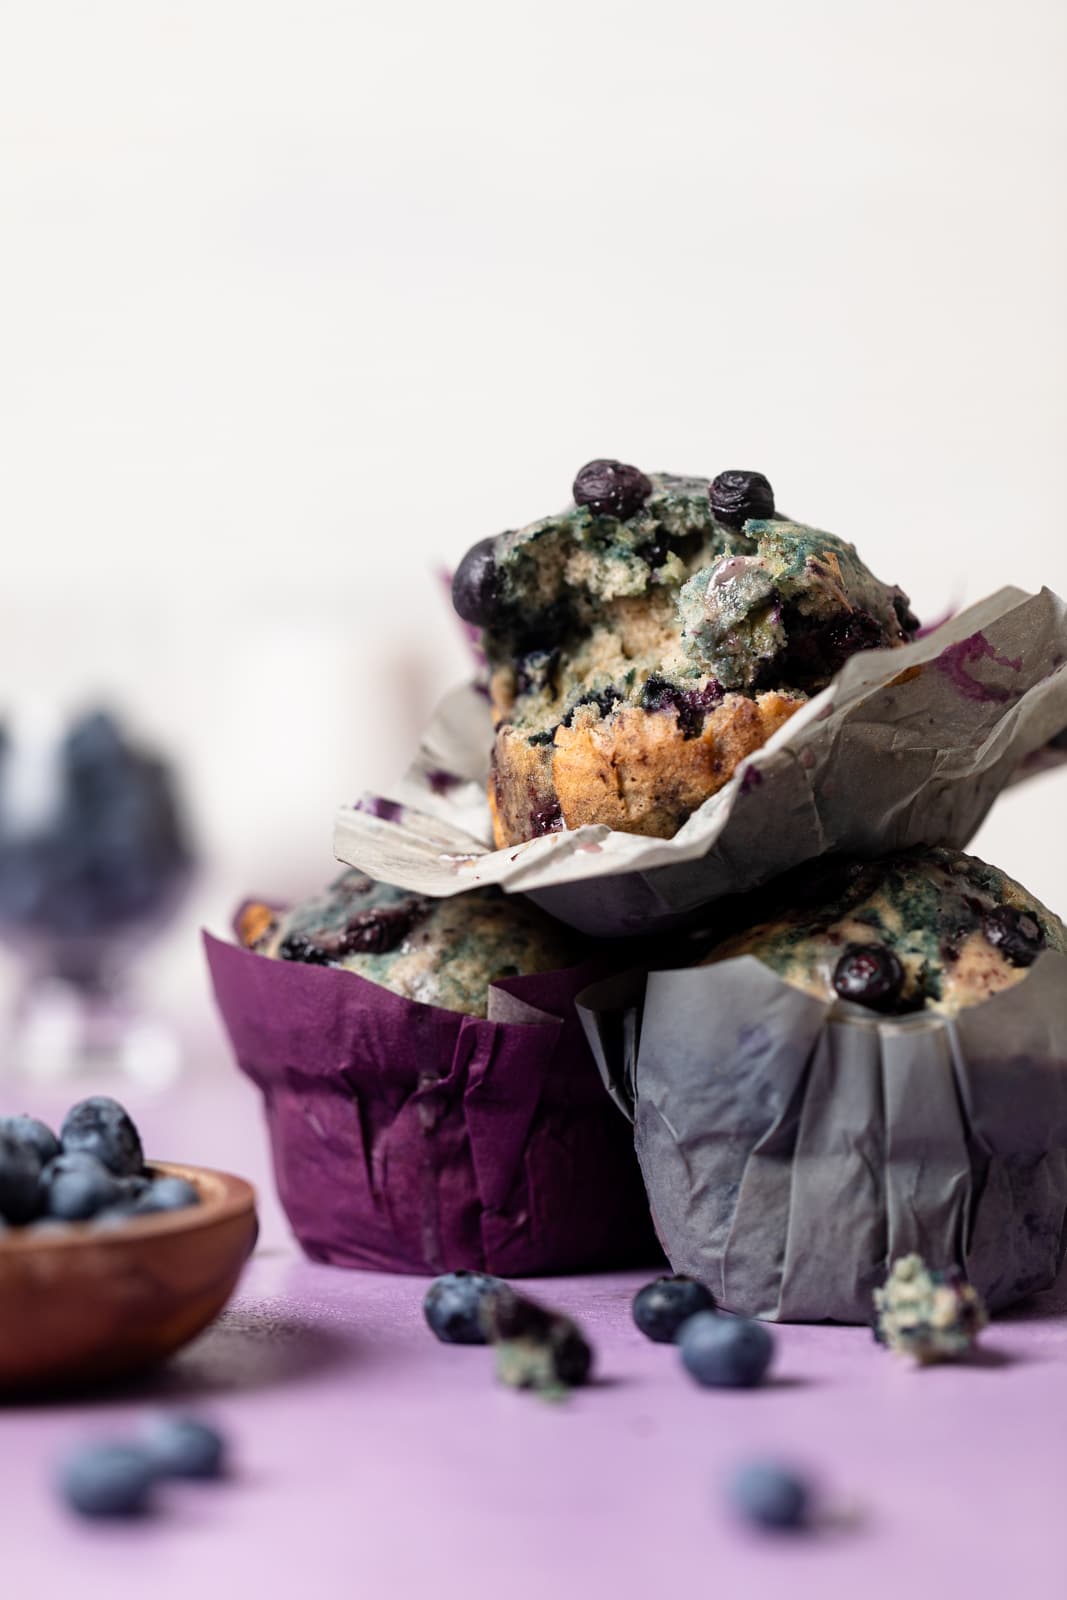 Pile of three Vegan Roasted Blueberry Muffins